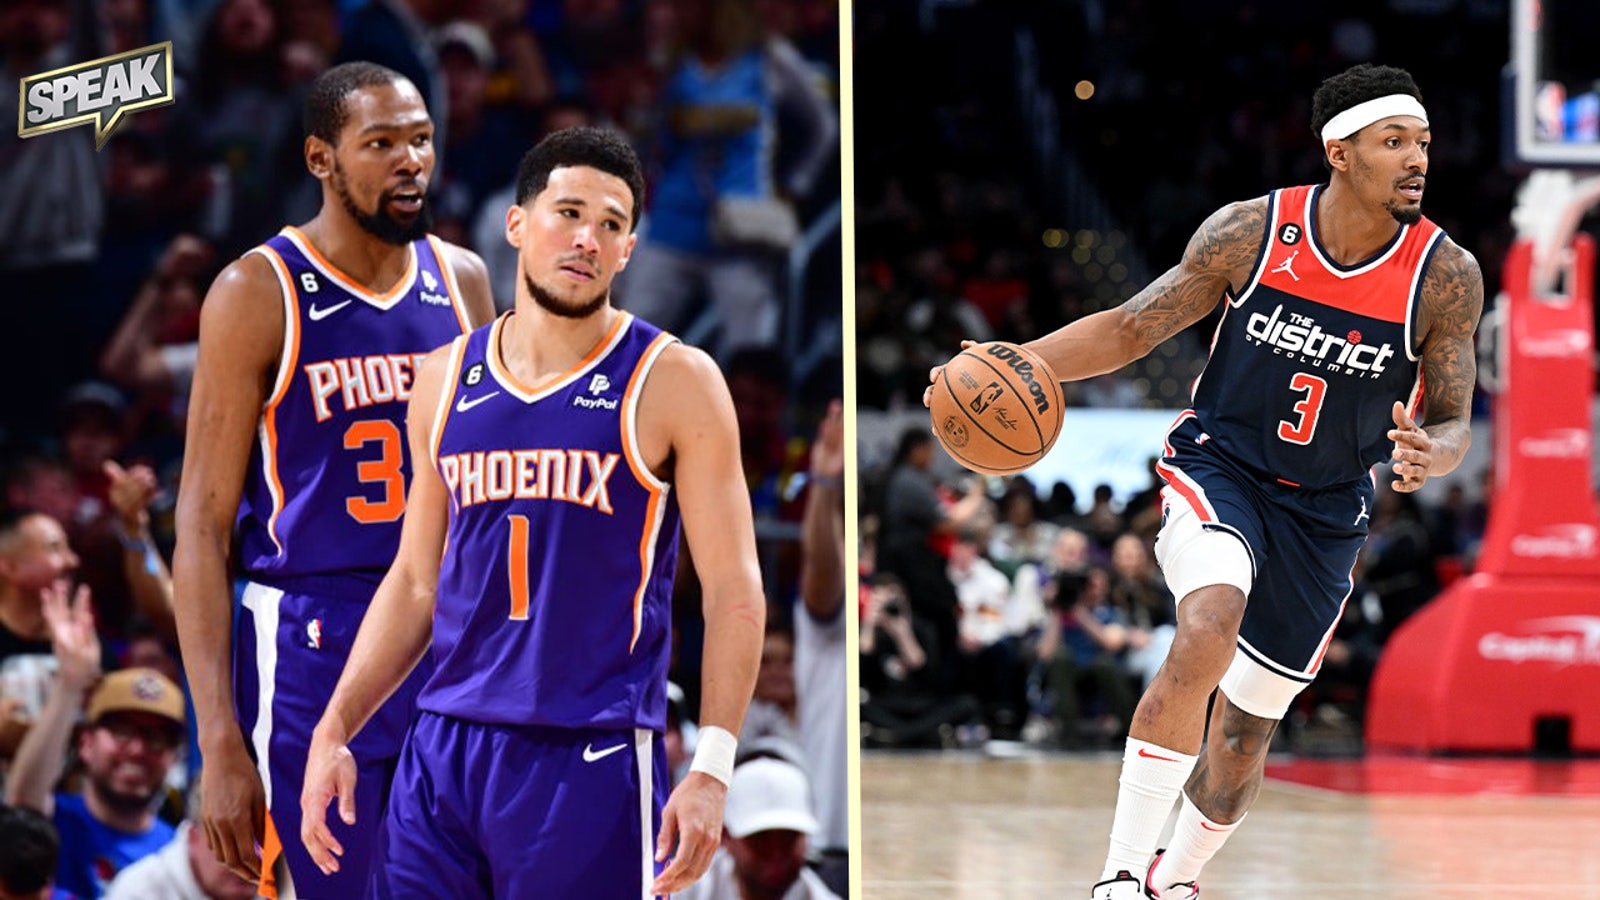 Expect Suns Big 3 of Kevin Durant-Devin Booker-Bradley Beal to win a title?